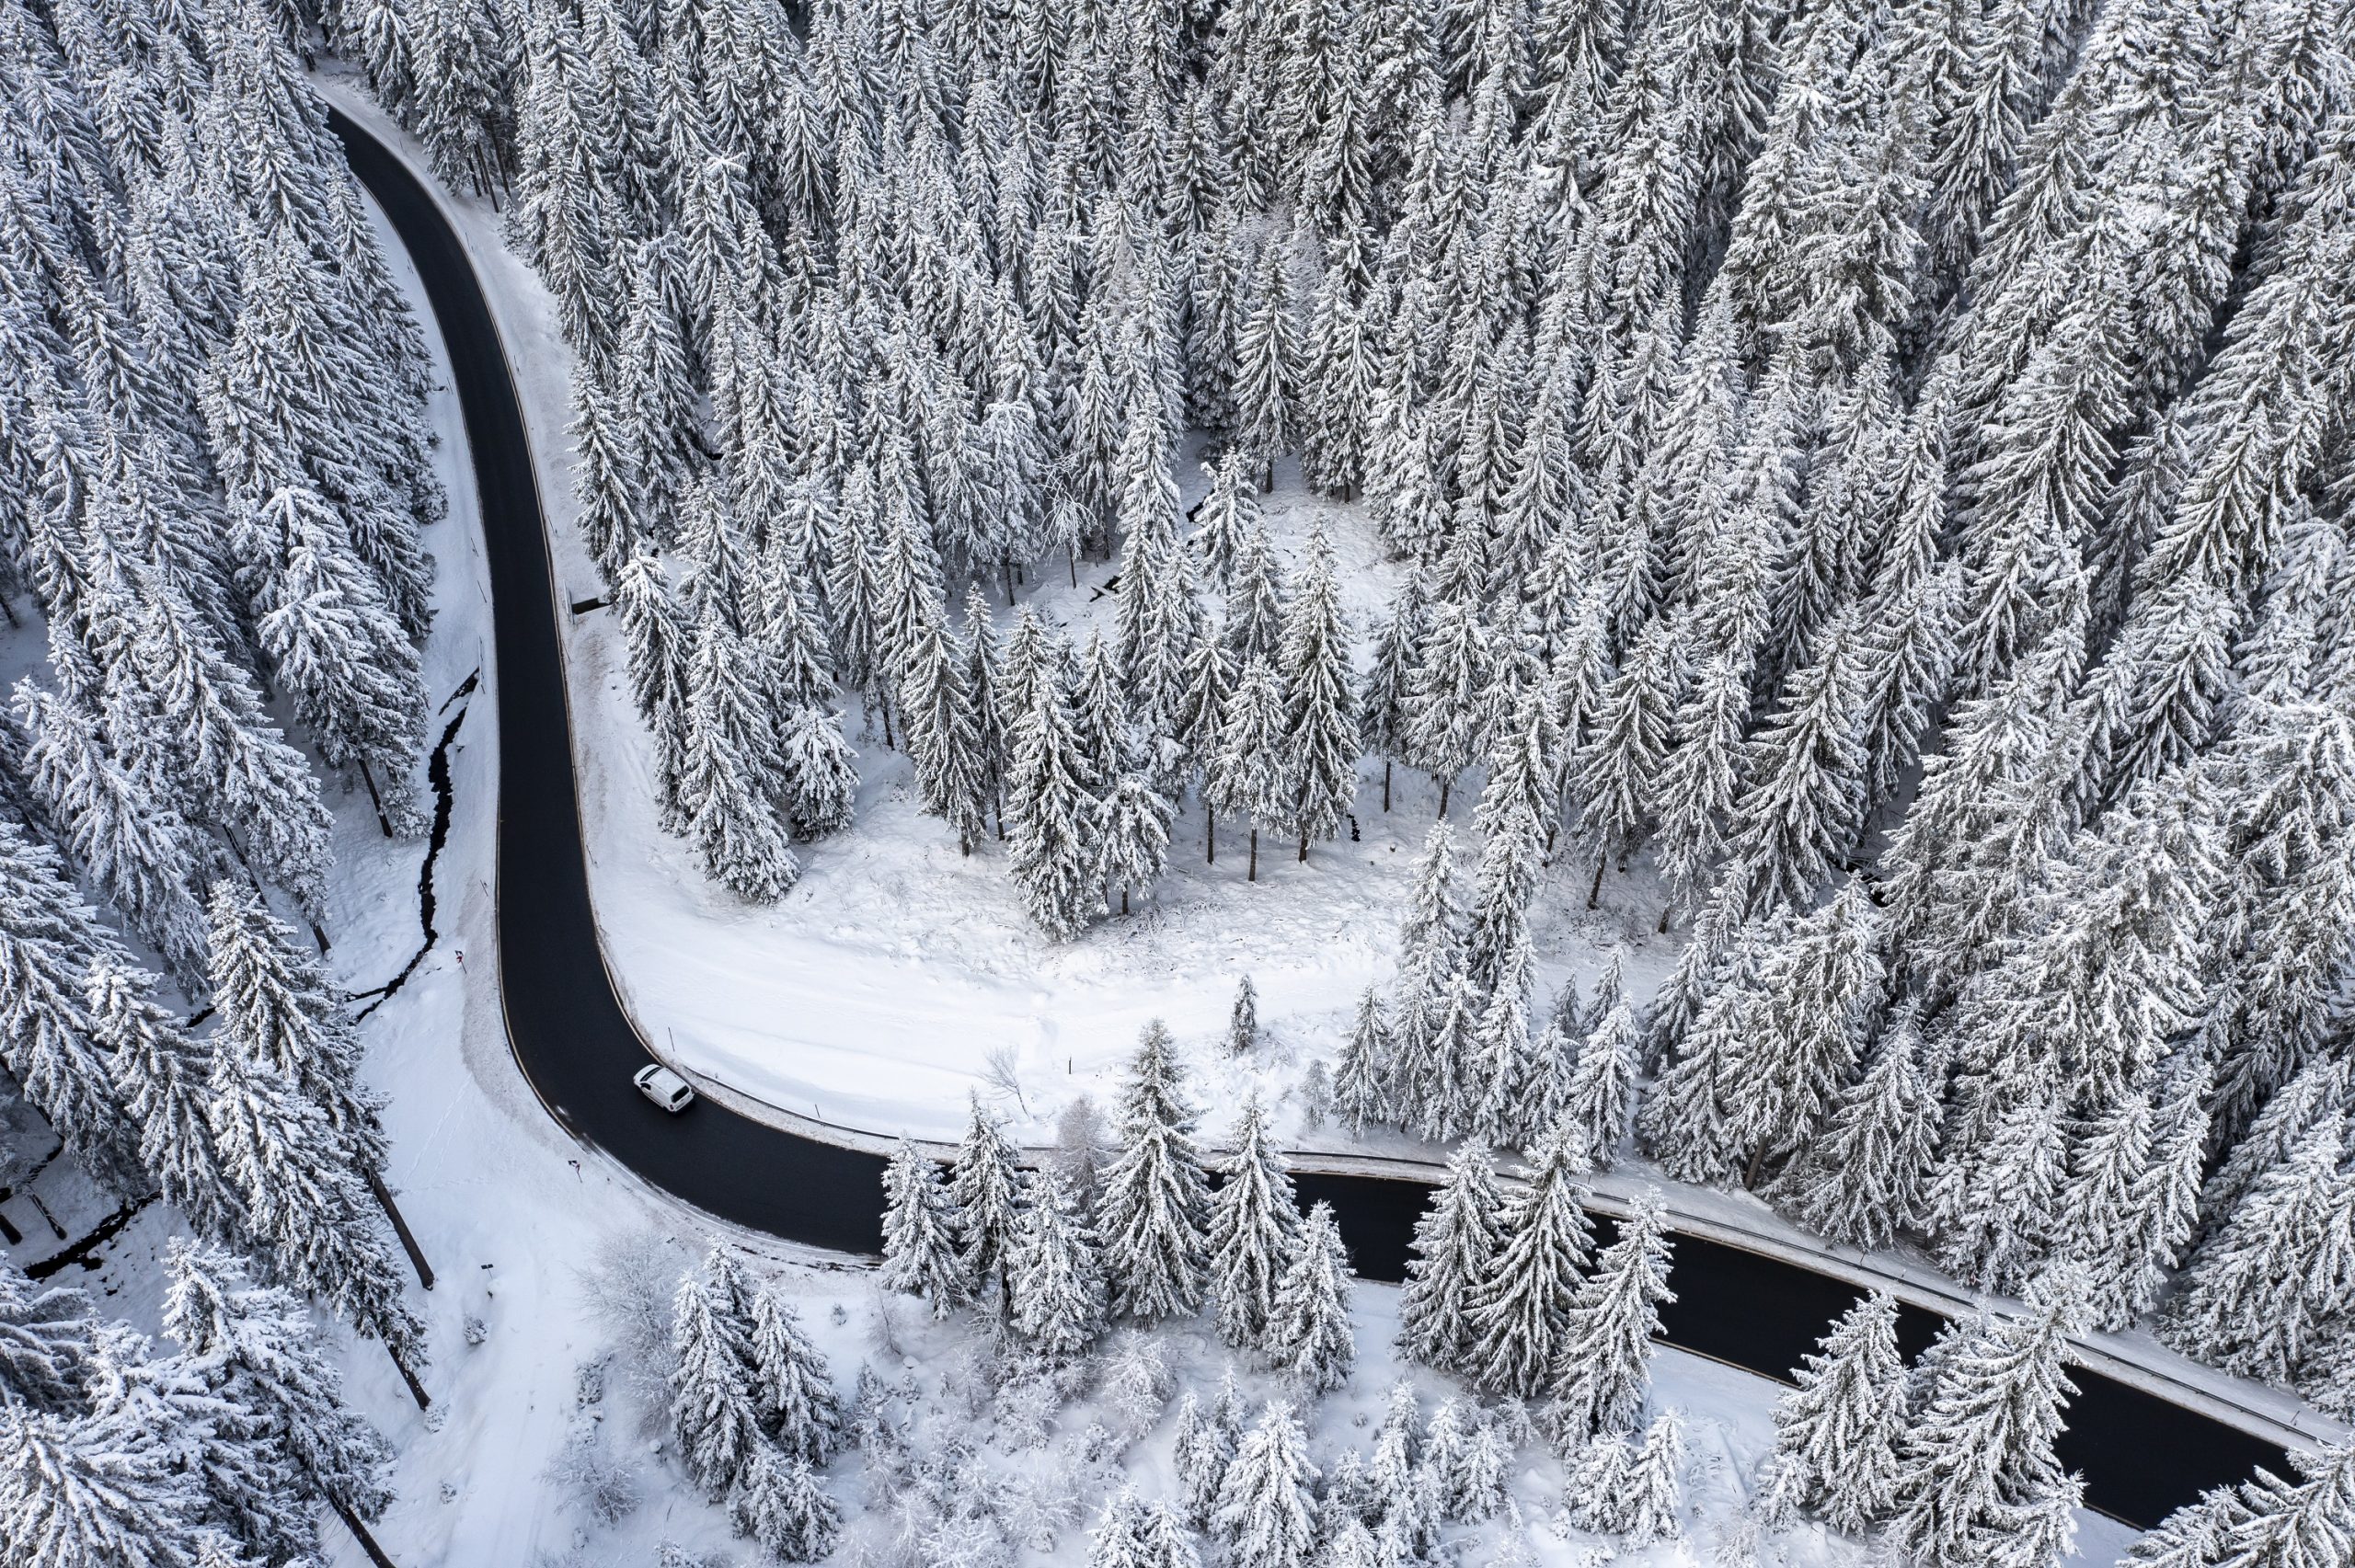 A car travels down an empty winding road in winter